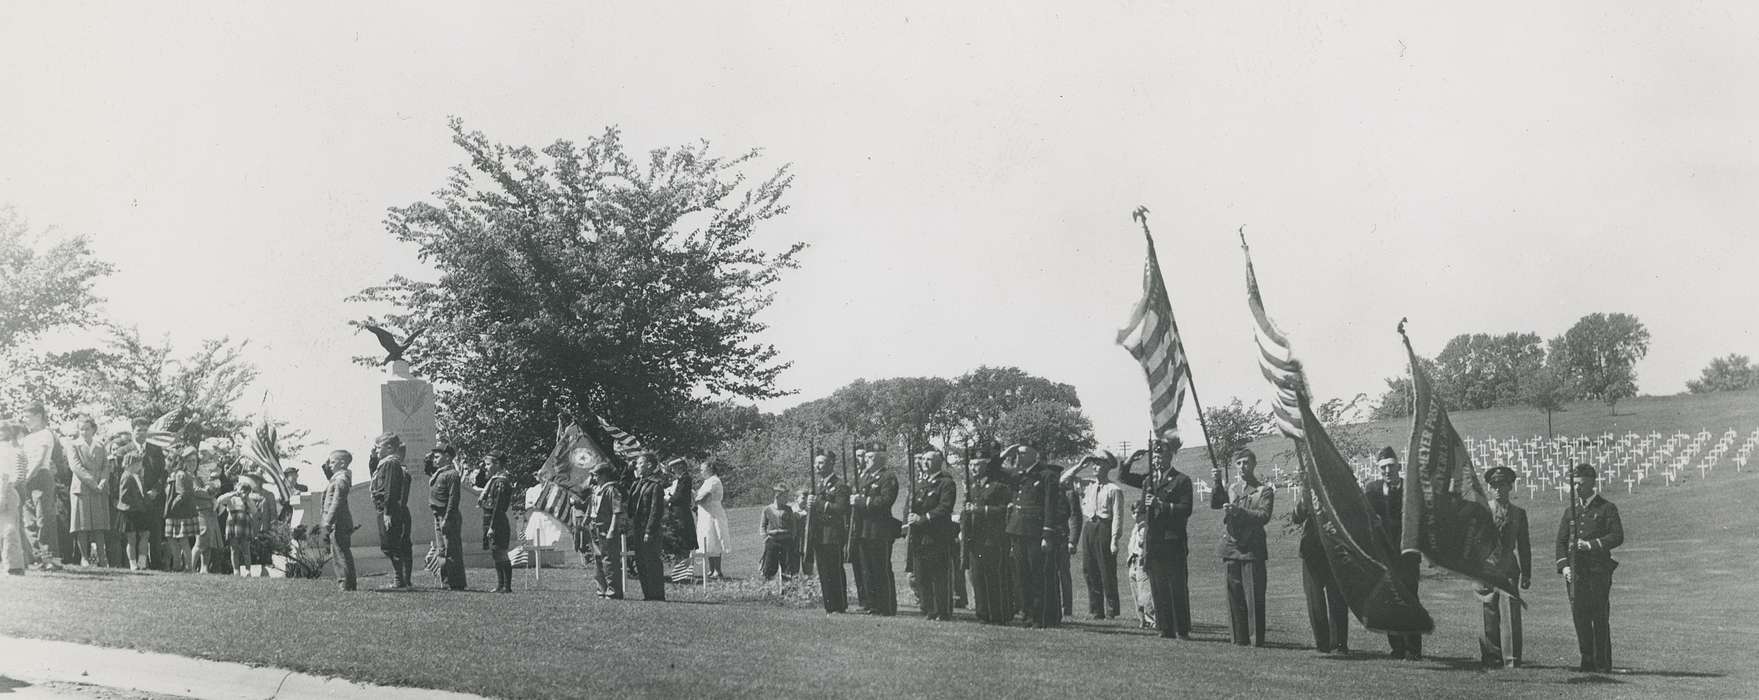 color guard, harlington, Iowa, memorial day, Military and Veterans, Iowa History, history of Iowa, Waverly Public Library, tree, salute, Waverly, IA, american flag, tombstone, soldier, Cemeteries and Funerals